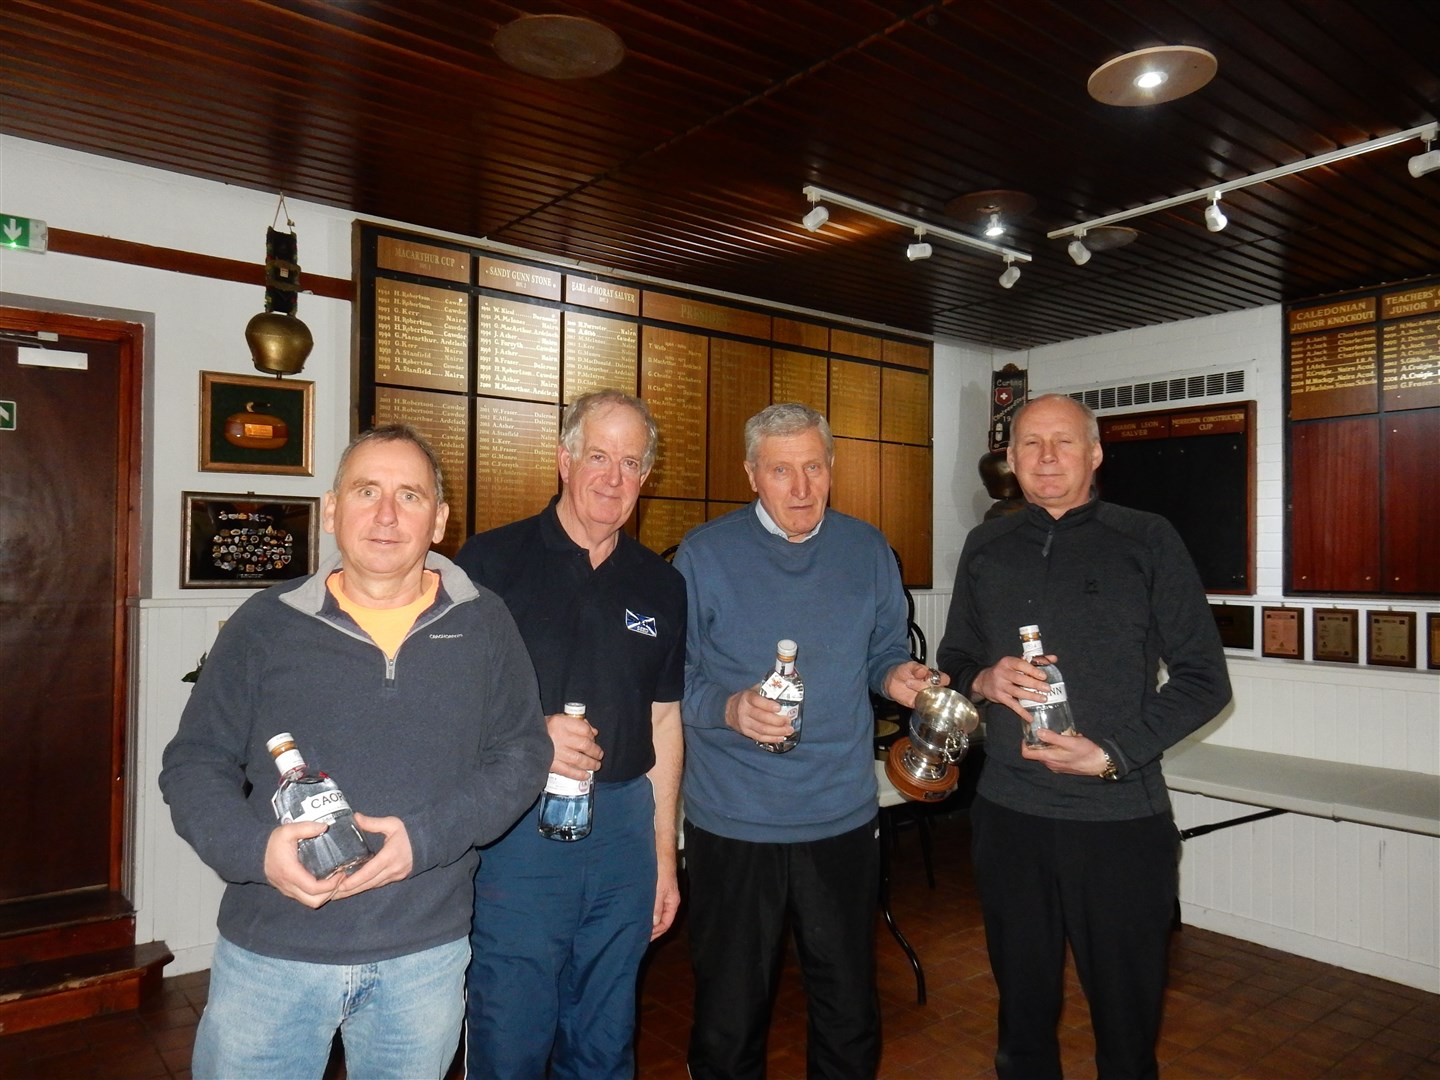 Paul Moodie, Mike Paul, Peter Fraser and Bill Main.